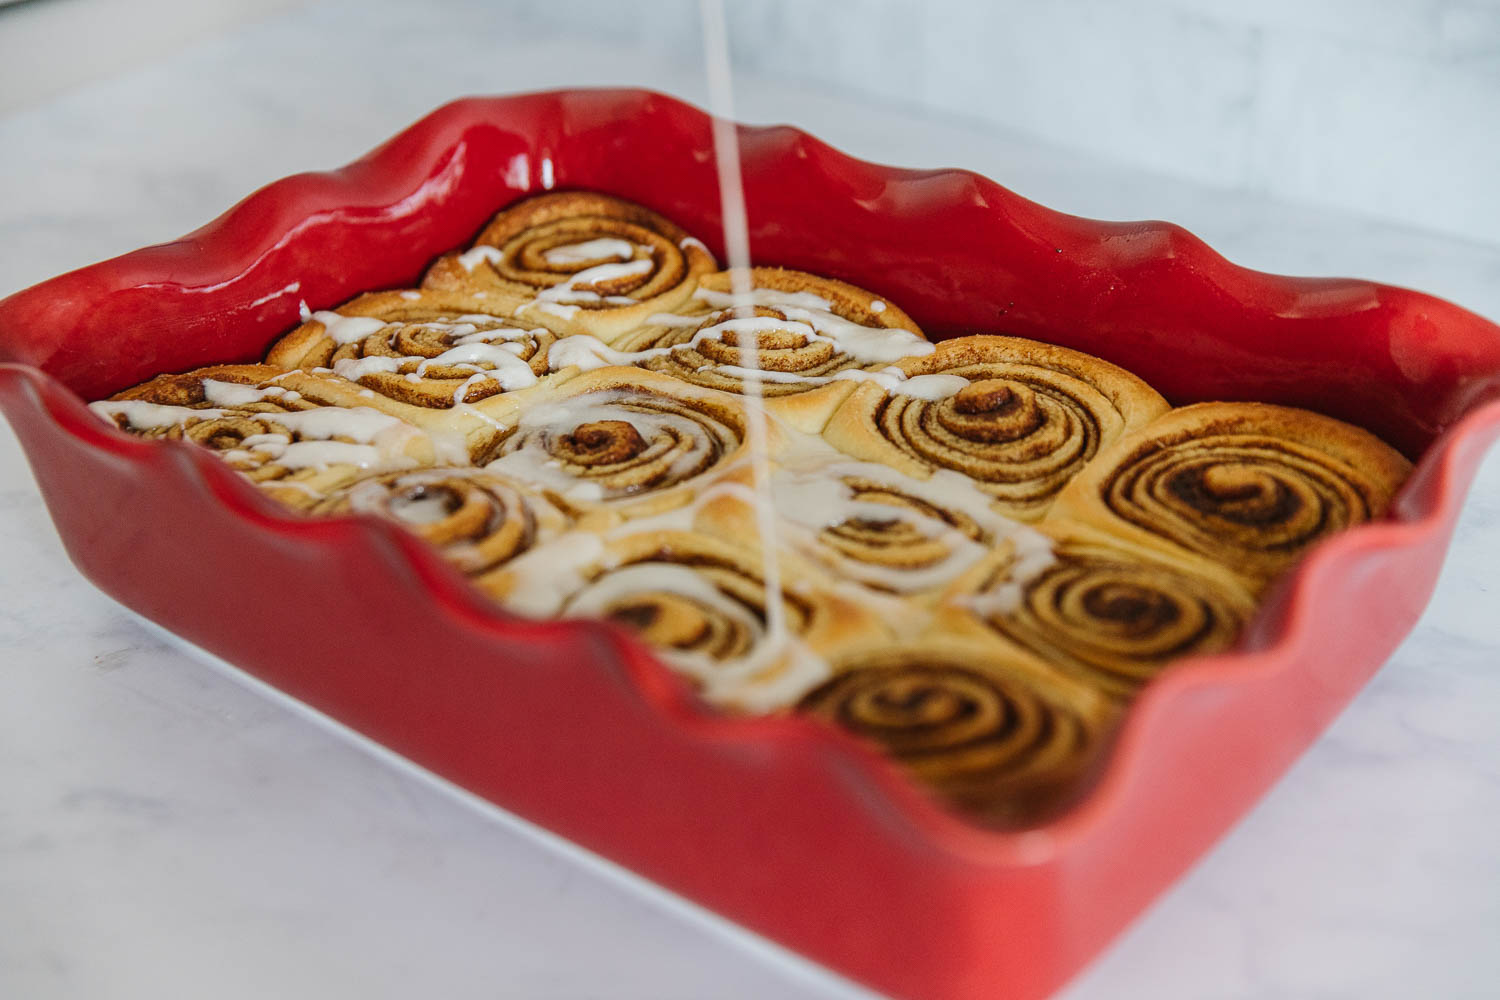 A red pan of cooked cinnamon rolls with icing dripping down onto the rolls.